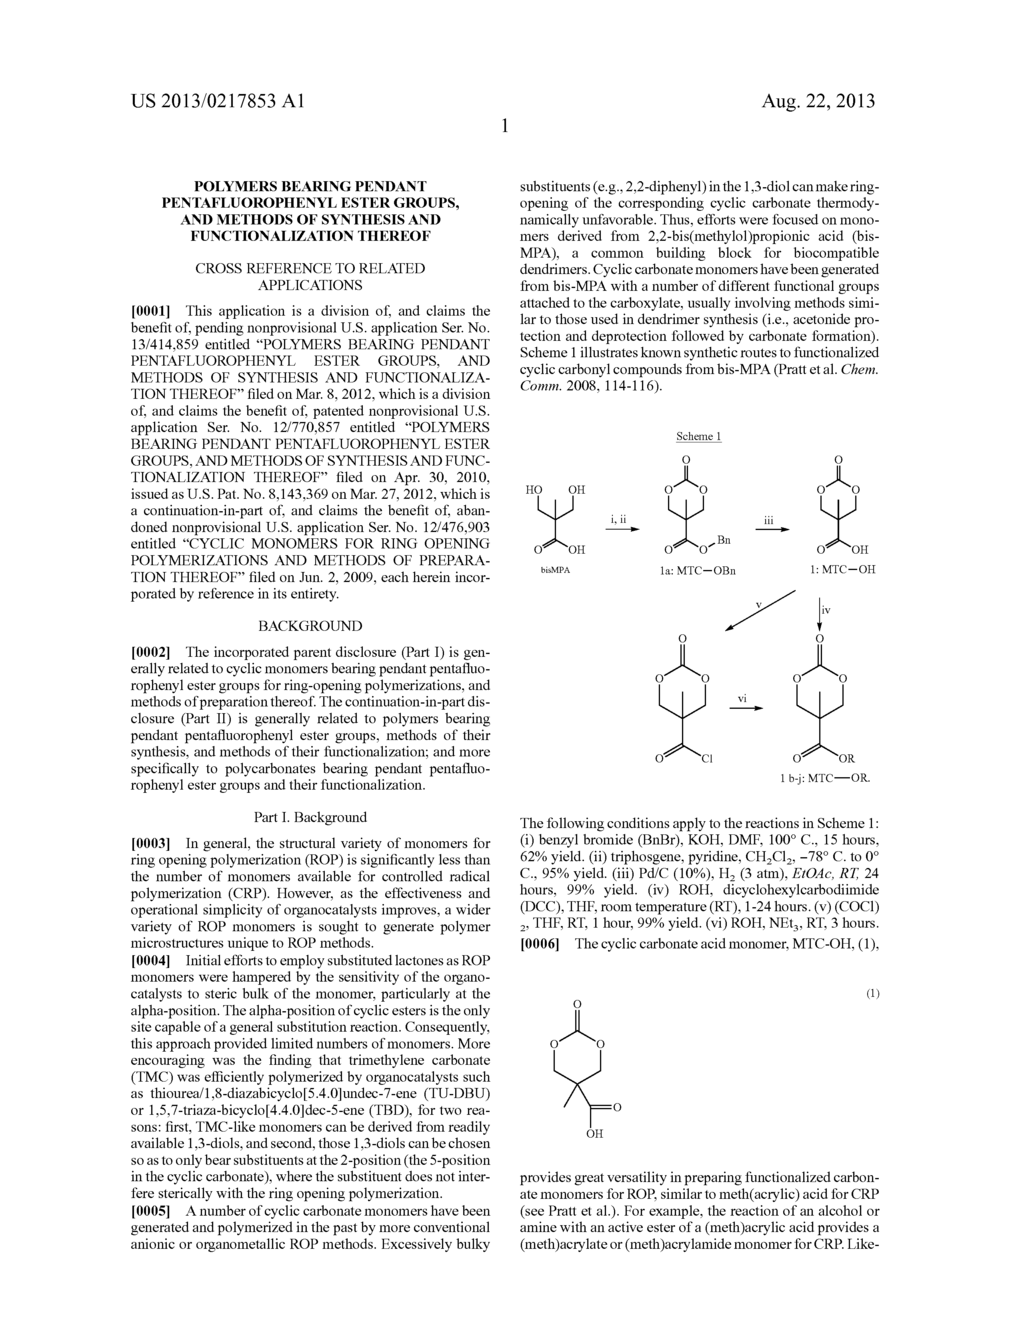 POLYMERS BEARING PENDANT PENTAFLUOROPHENYL ESTER GROUPS, AND METHODS OF     SYNTHESIS AND FUNCTIONALIZATION THEREOF - diagram, schematic, and image 16